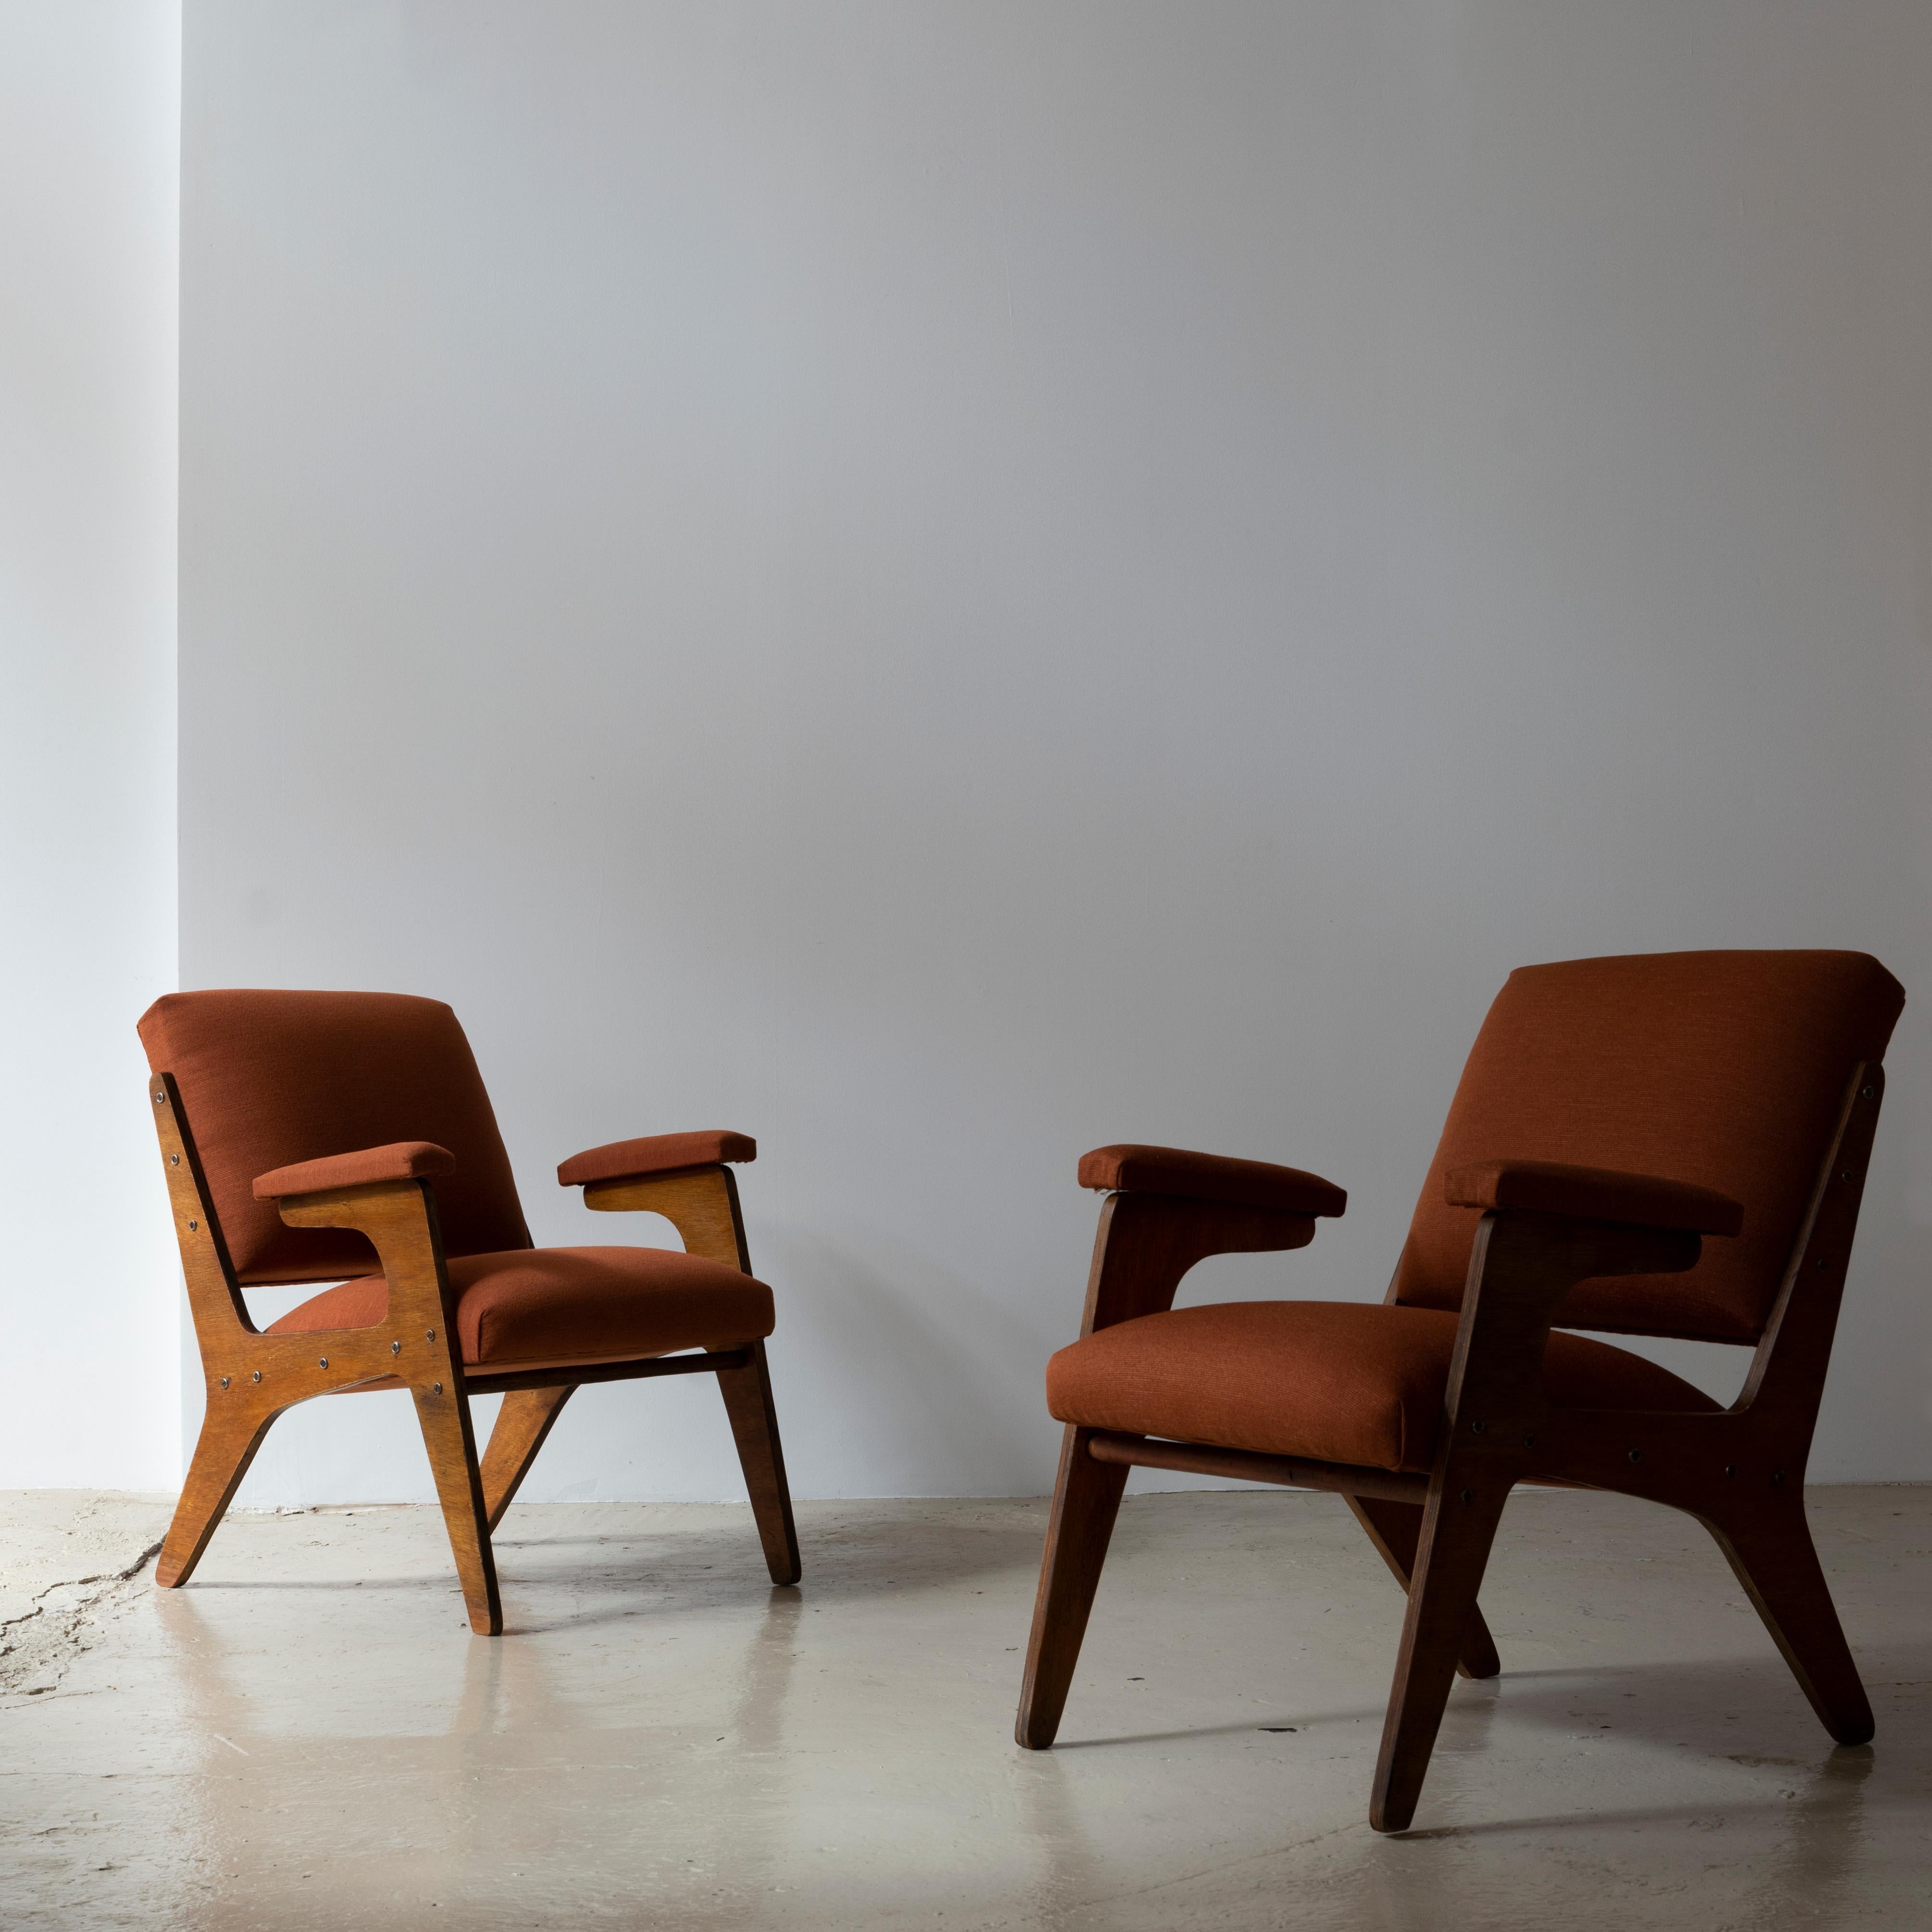 Armchairs called 'H Armchair' designed by Brazilian architect and designer José Zanine Caldas for Mòveis Artisticos Z in 1950s.
Reupholstered with linen fabric.
A set of two.